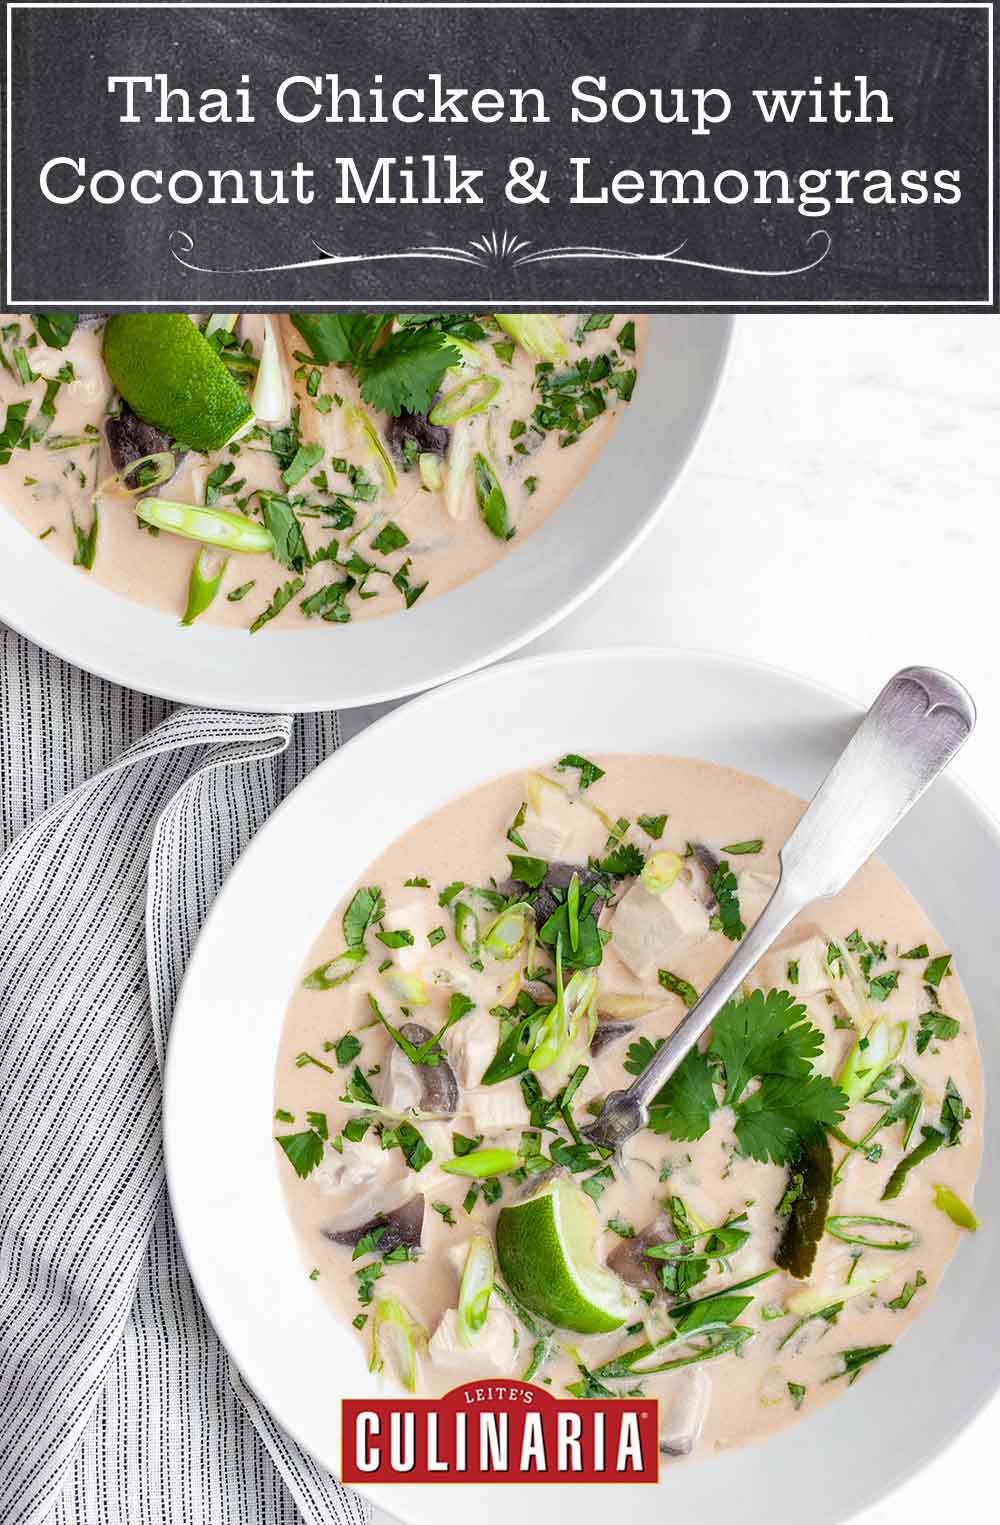 Two bowls of Thai-inspired chicken soup with coconut milk and lemongrass on a striped napkin.